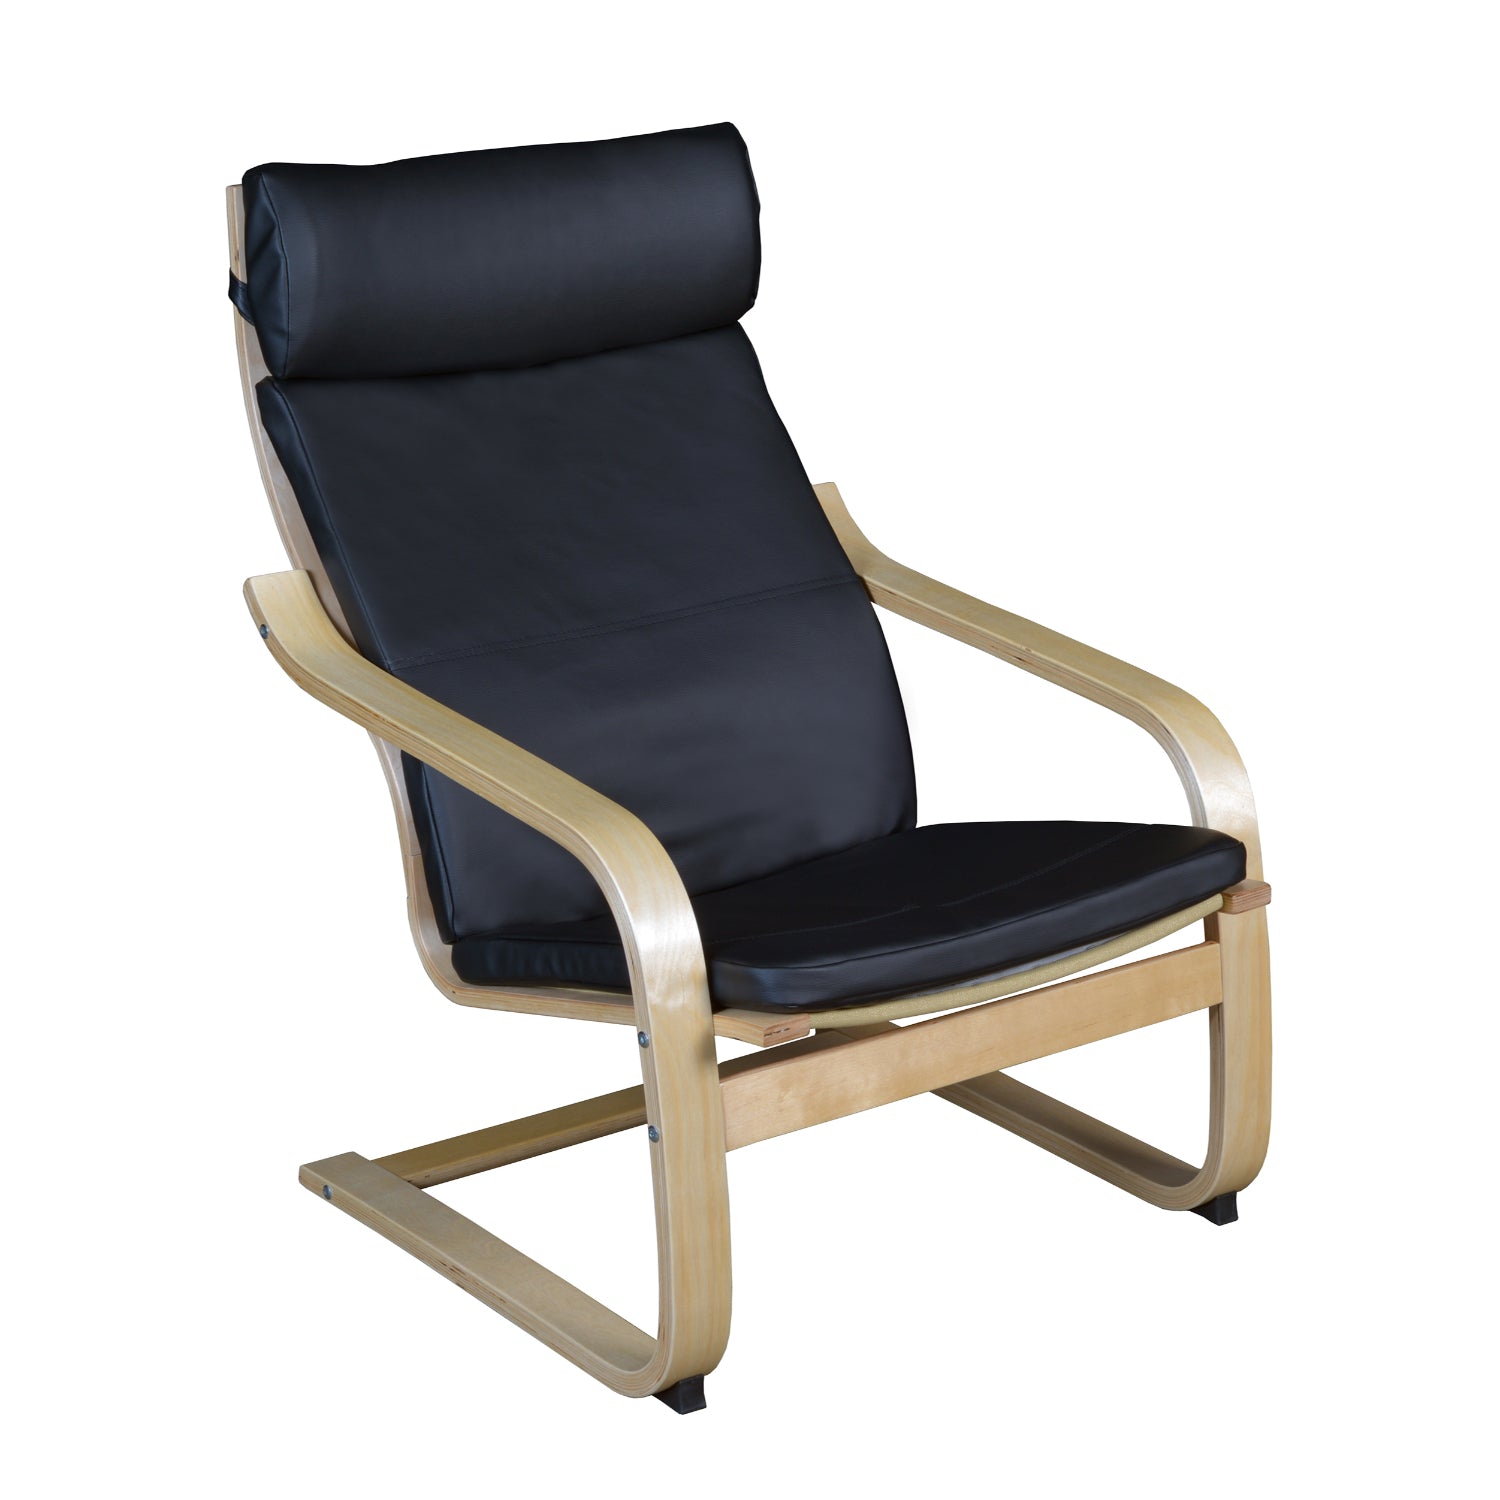 Niche Mia Bentwood Reclining Chair, Natural Frame Finish, Black Leather Upholstery